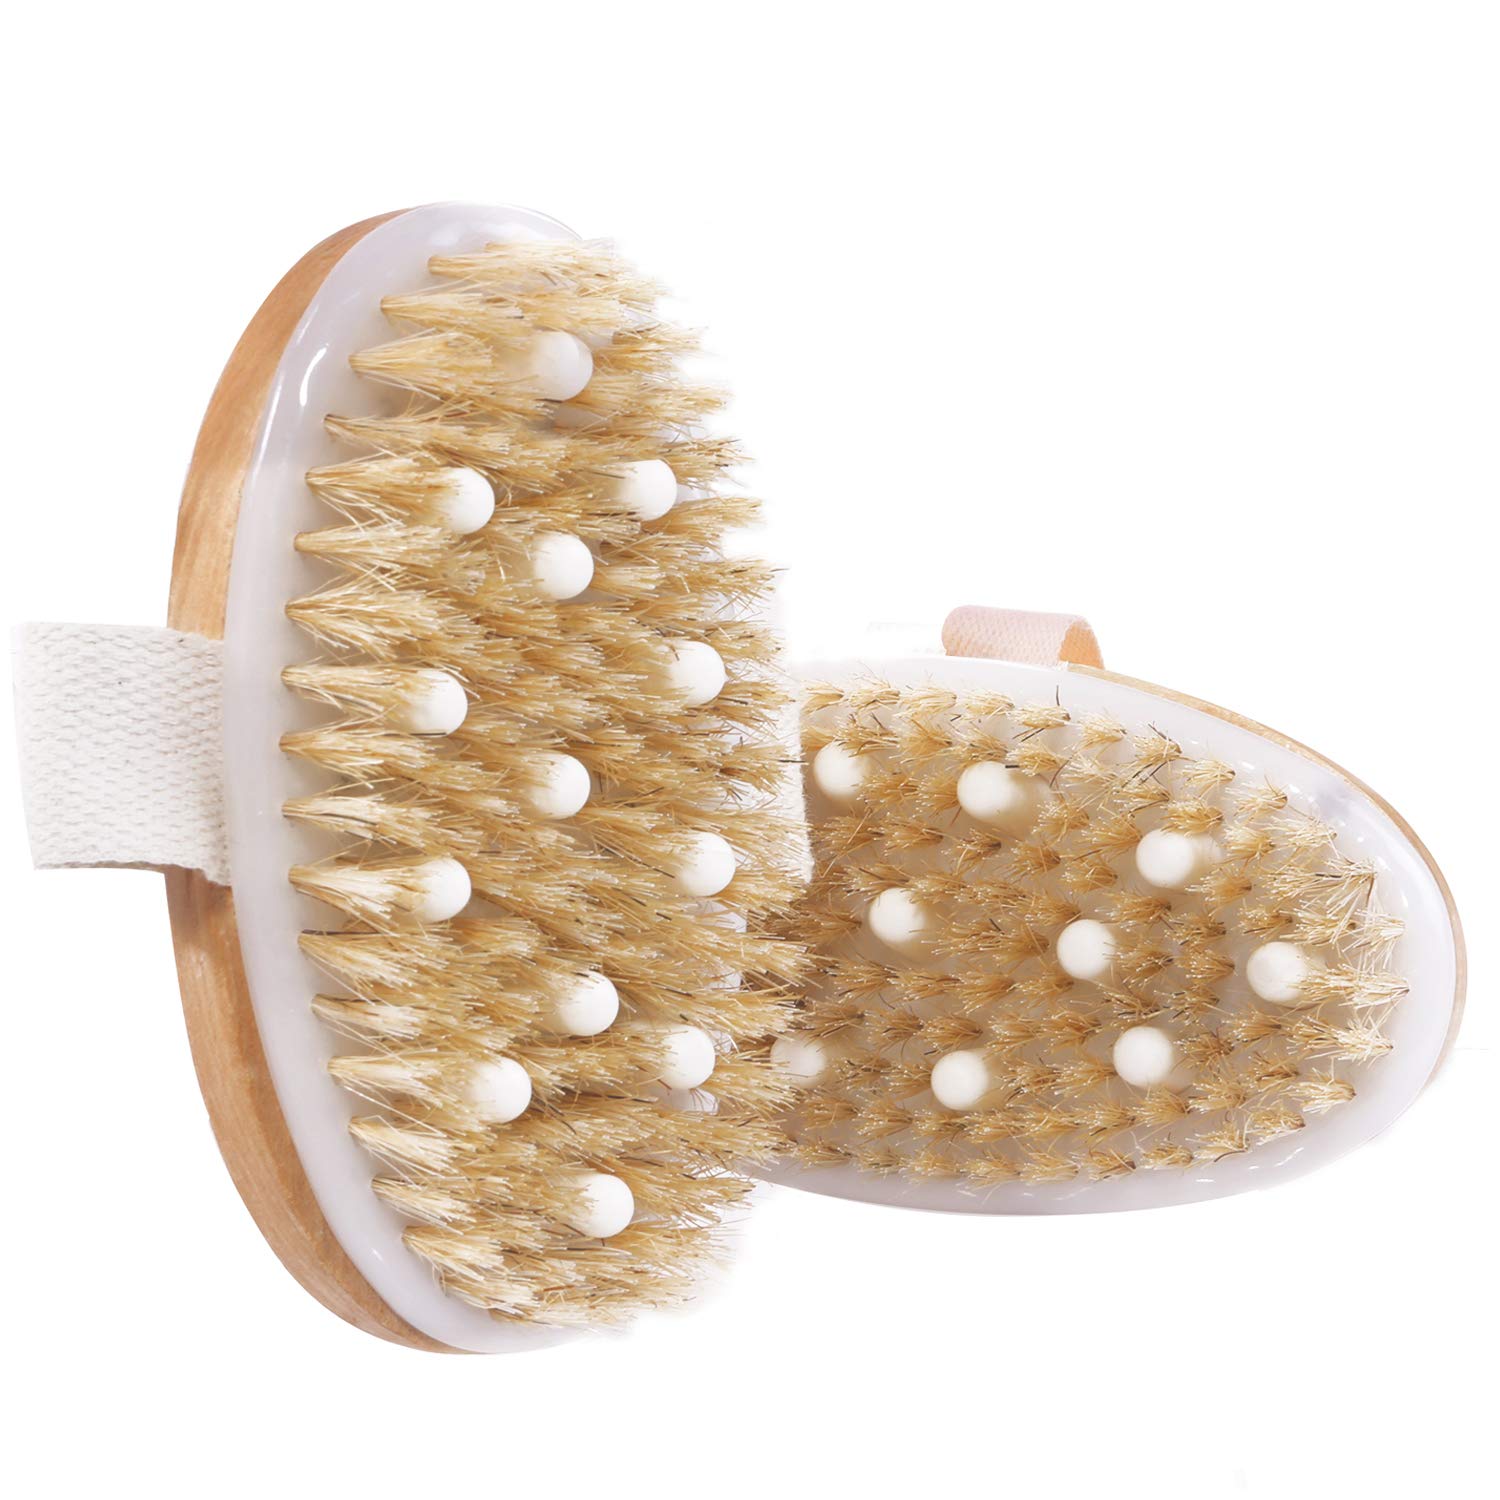 2 Pcs Dry Brushing Body Brush Bath Brush?Gospire Natural Bristle Gentle Exfoliating for Softer?Gentle Massage Nodes for Treatment & Improves Lymphatic Functions, Stimulates Blood Circulation